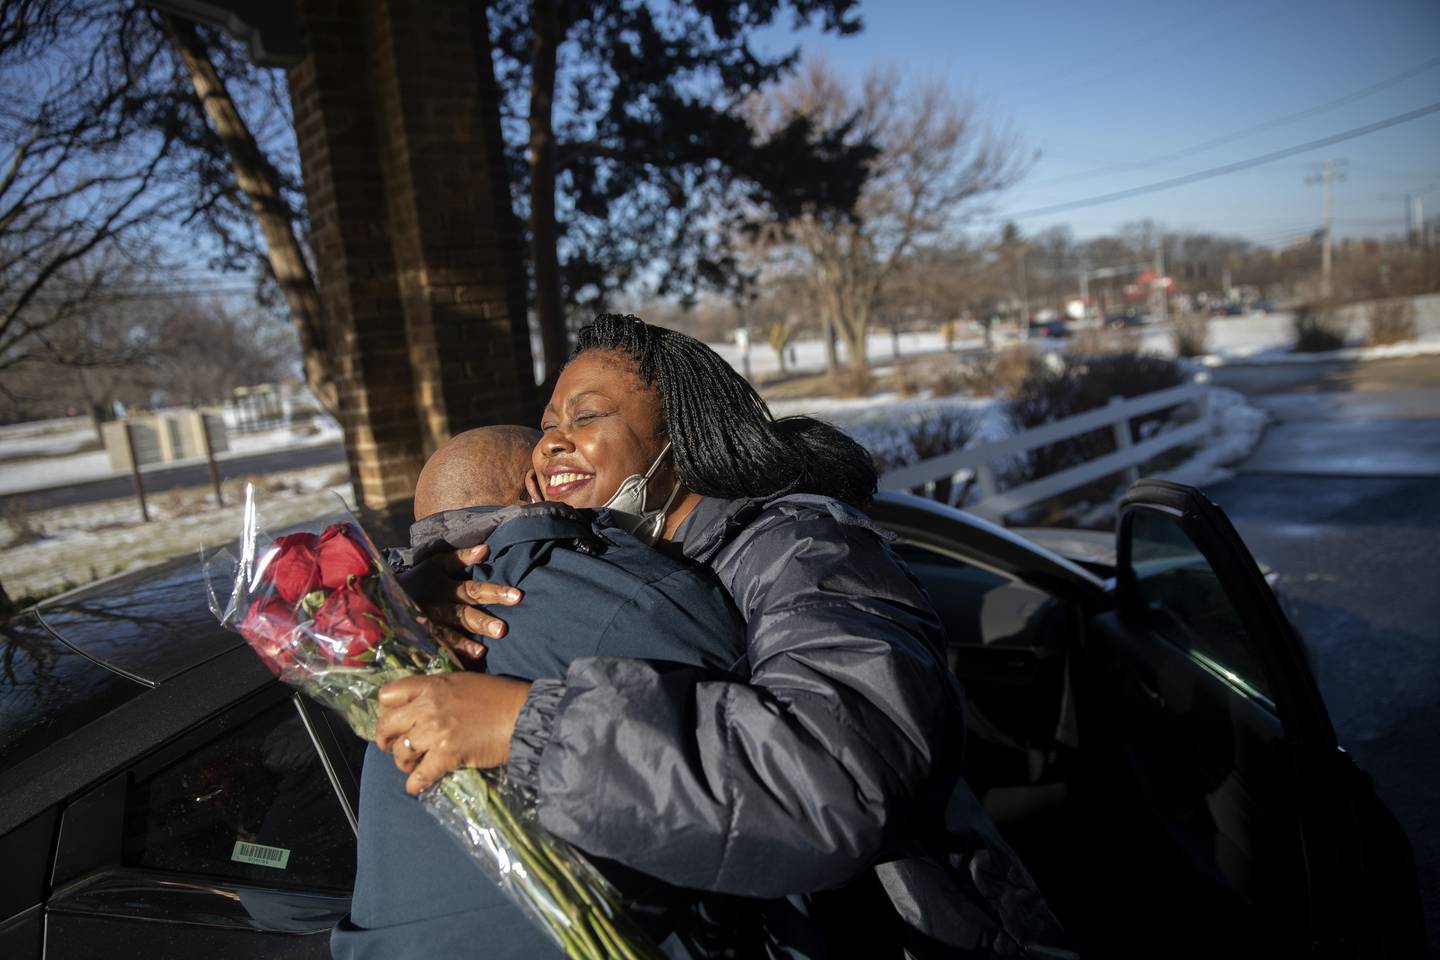 Sandra hugs her husband, Arnold Bass, who brought flowers for her, as she leaves Fox Valley Adult Transition Center on Jan. 13, 2022. Sandra met Arnold through a prisoner correspondence website. The two eventually fell in love through letters and married in 2018 while Sandra was still incarcerated.